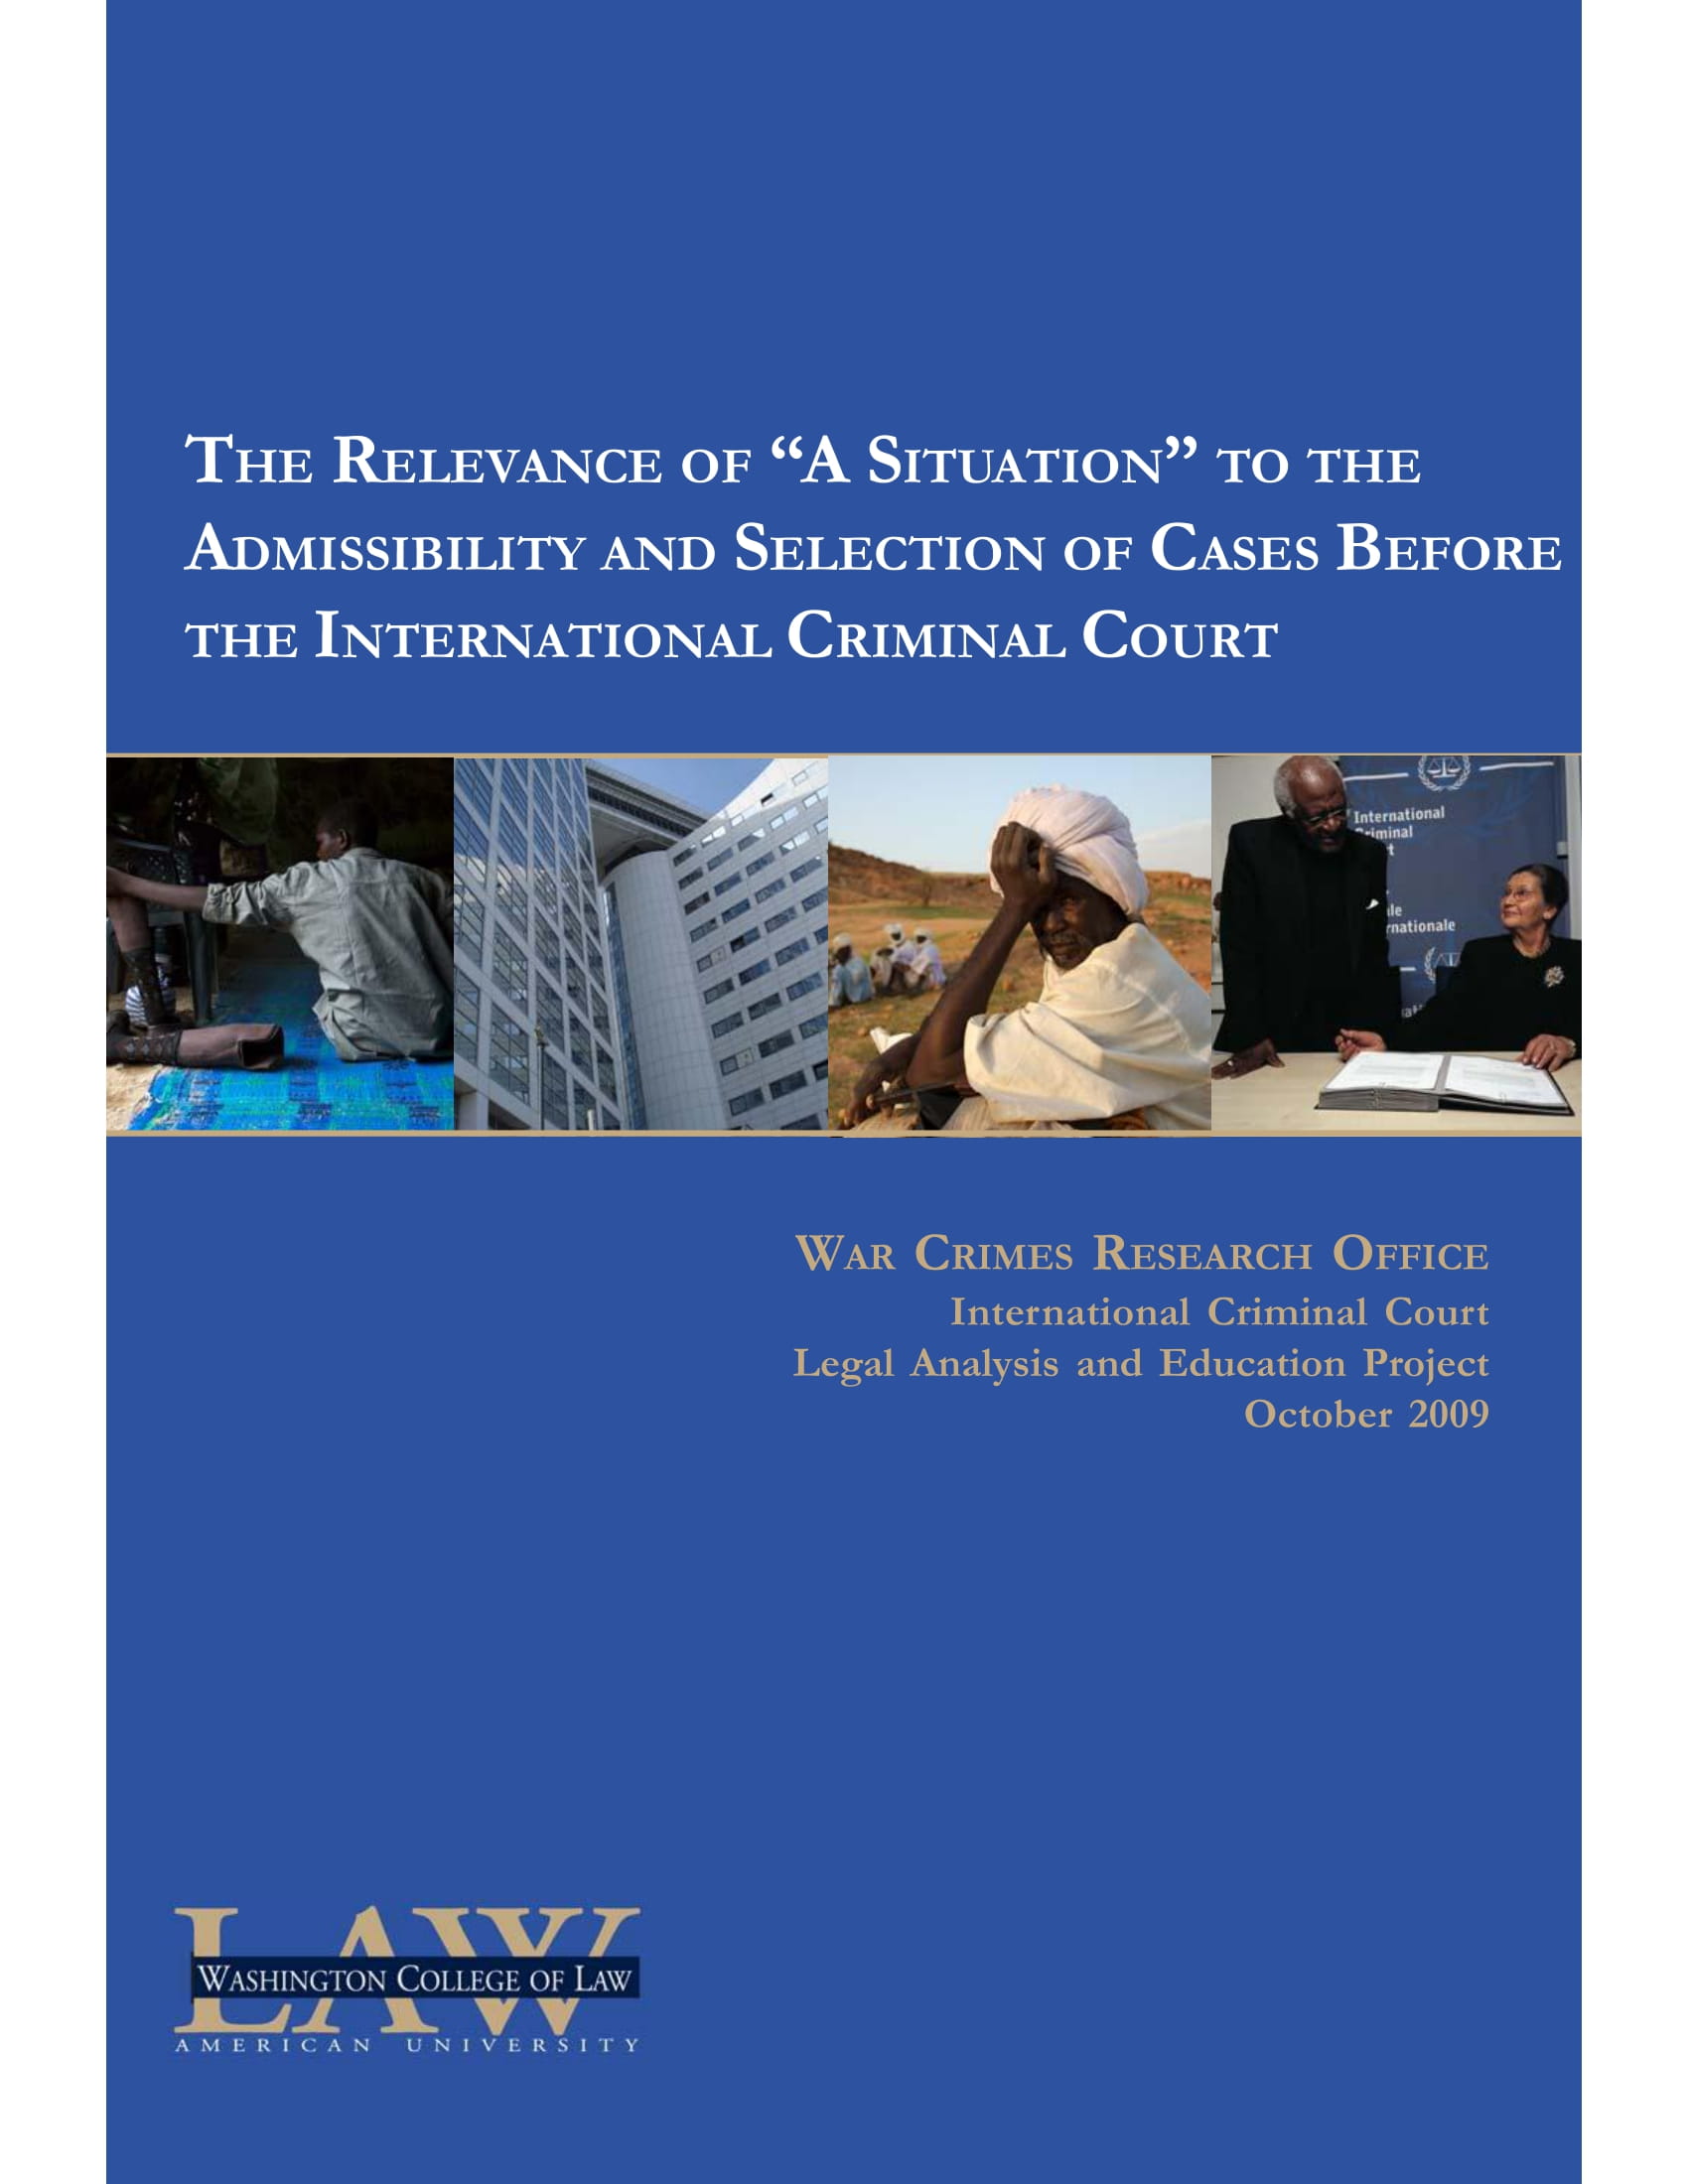 Report 9: The Relevance of “A Situation” to the Admissibility and Selection of Cases Before the ICC